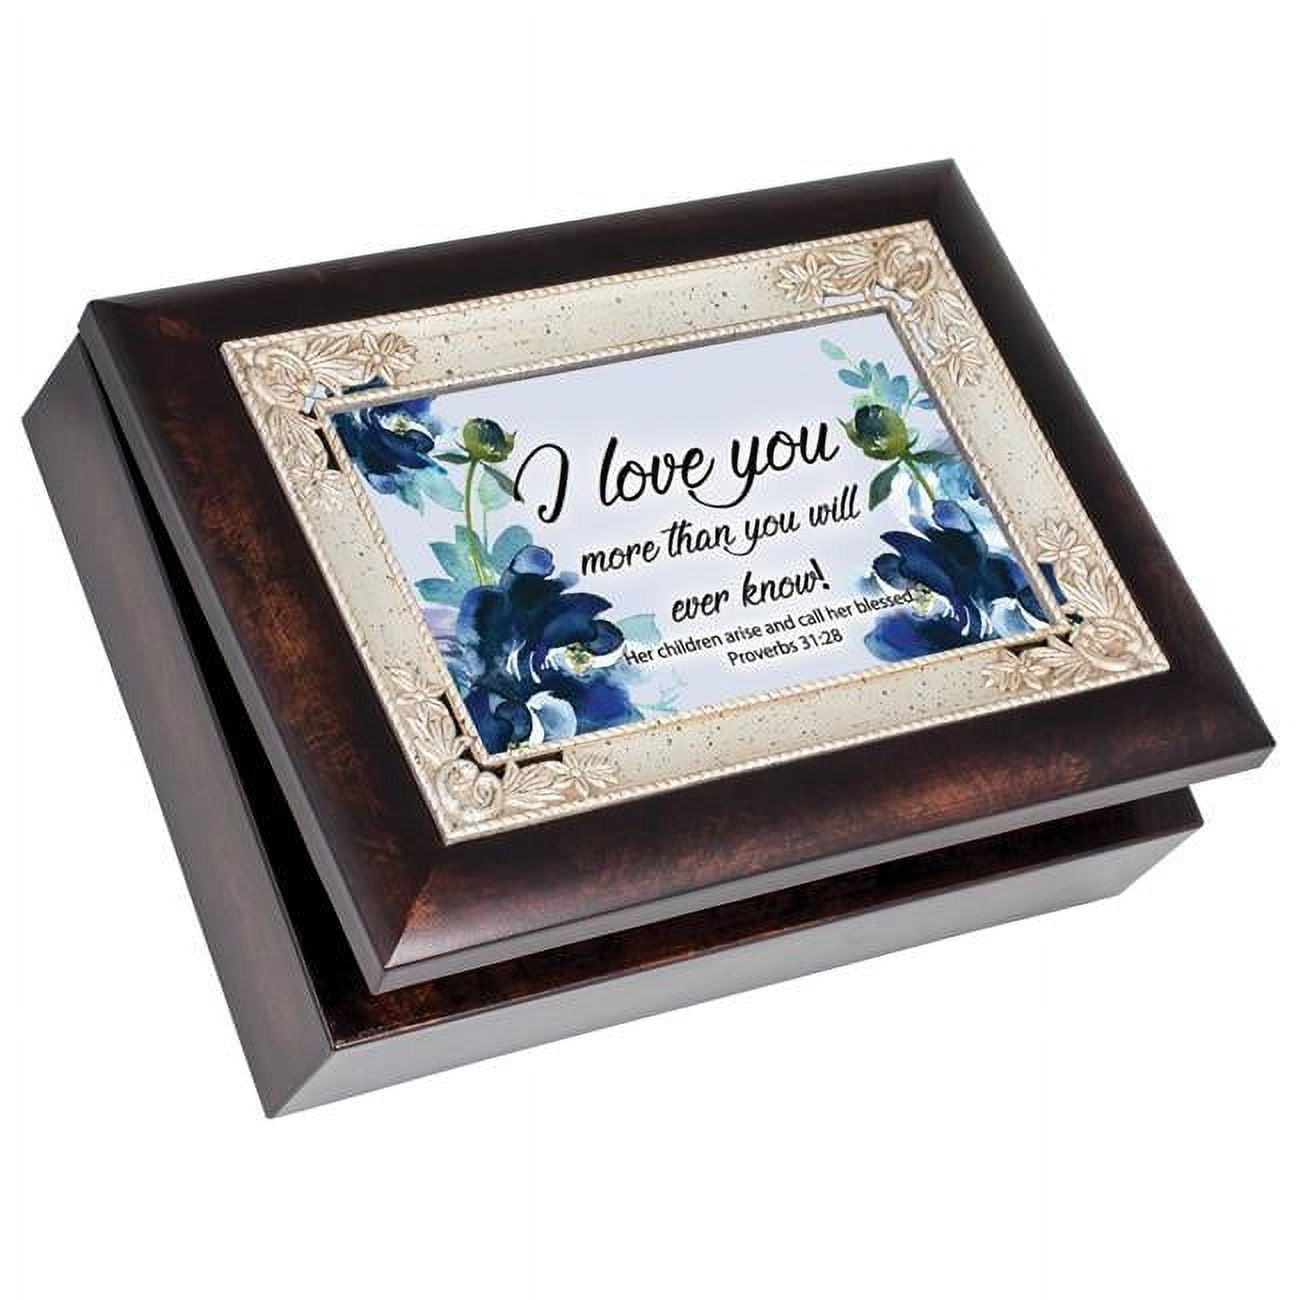 IMB242S 6 x 4 in. I Love You More Than You Proverbs 31-28 Music Box -  Cottage Garden